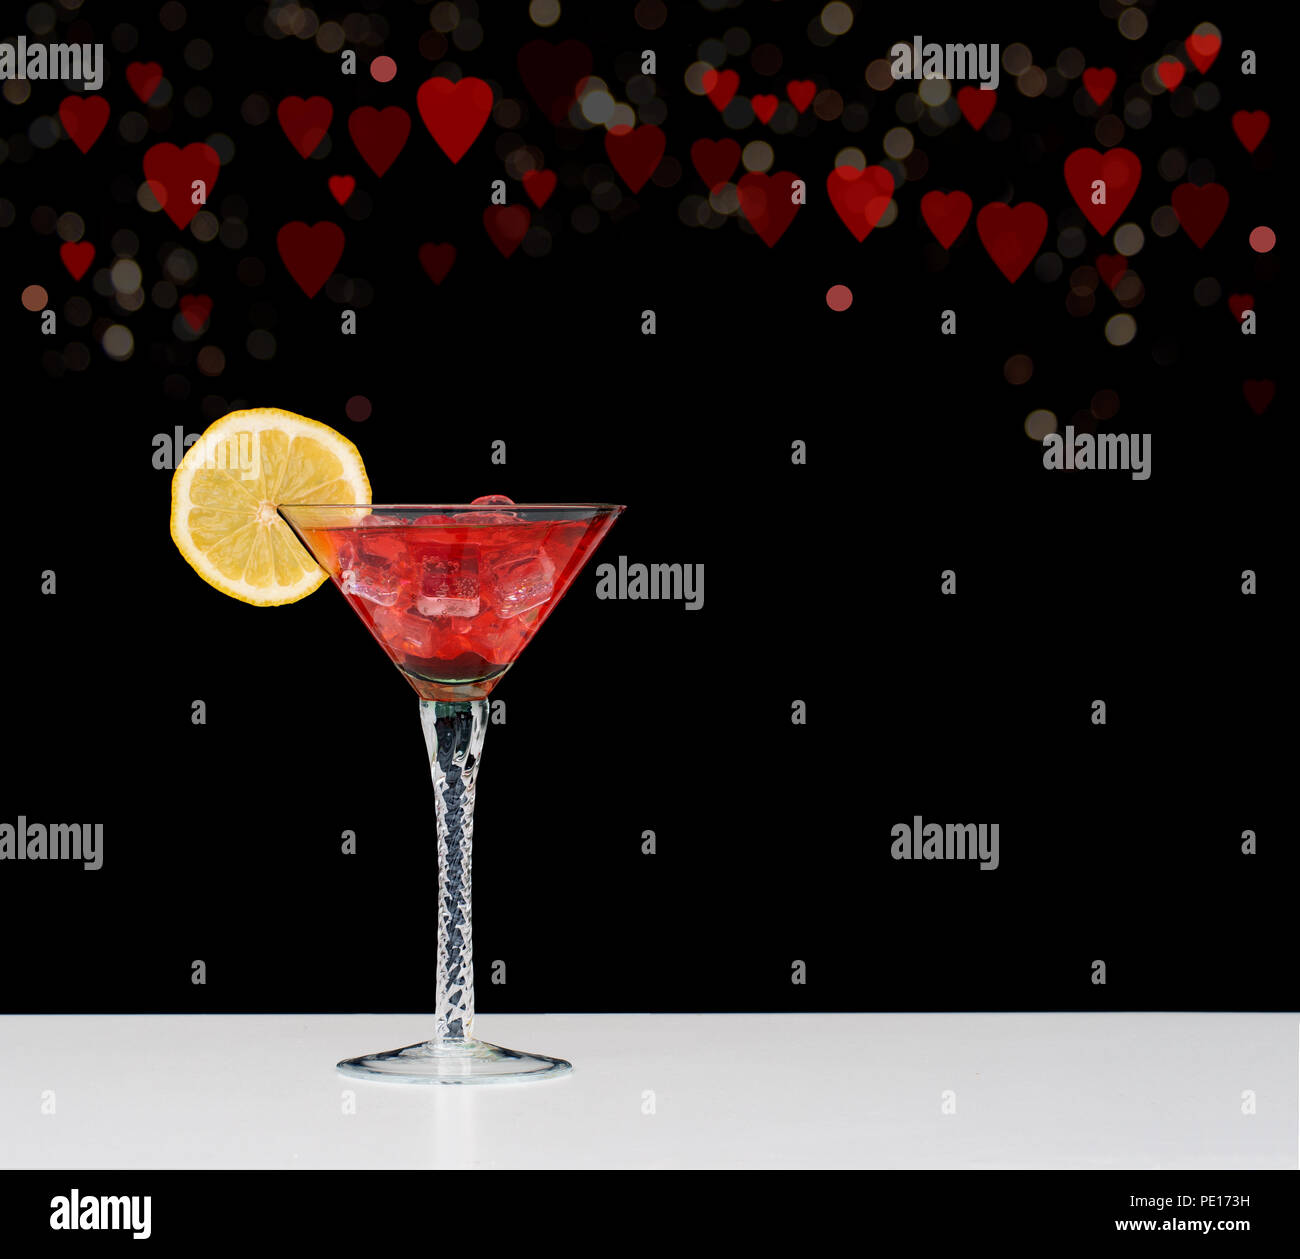 Romantic pink cocktail with ice, lemon and fresh raspberries. Triangular glass on white with black background behind with bokeh of hearts and circles. Stock Photo